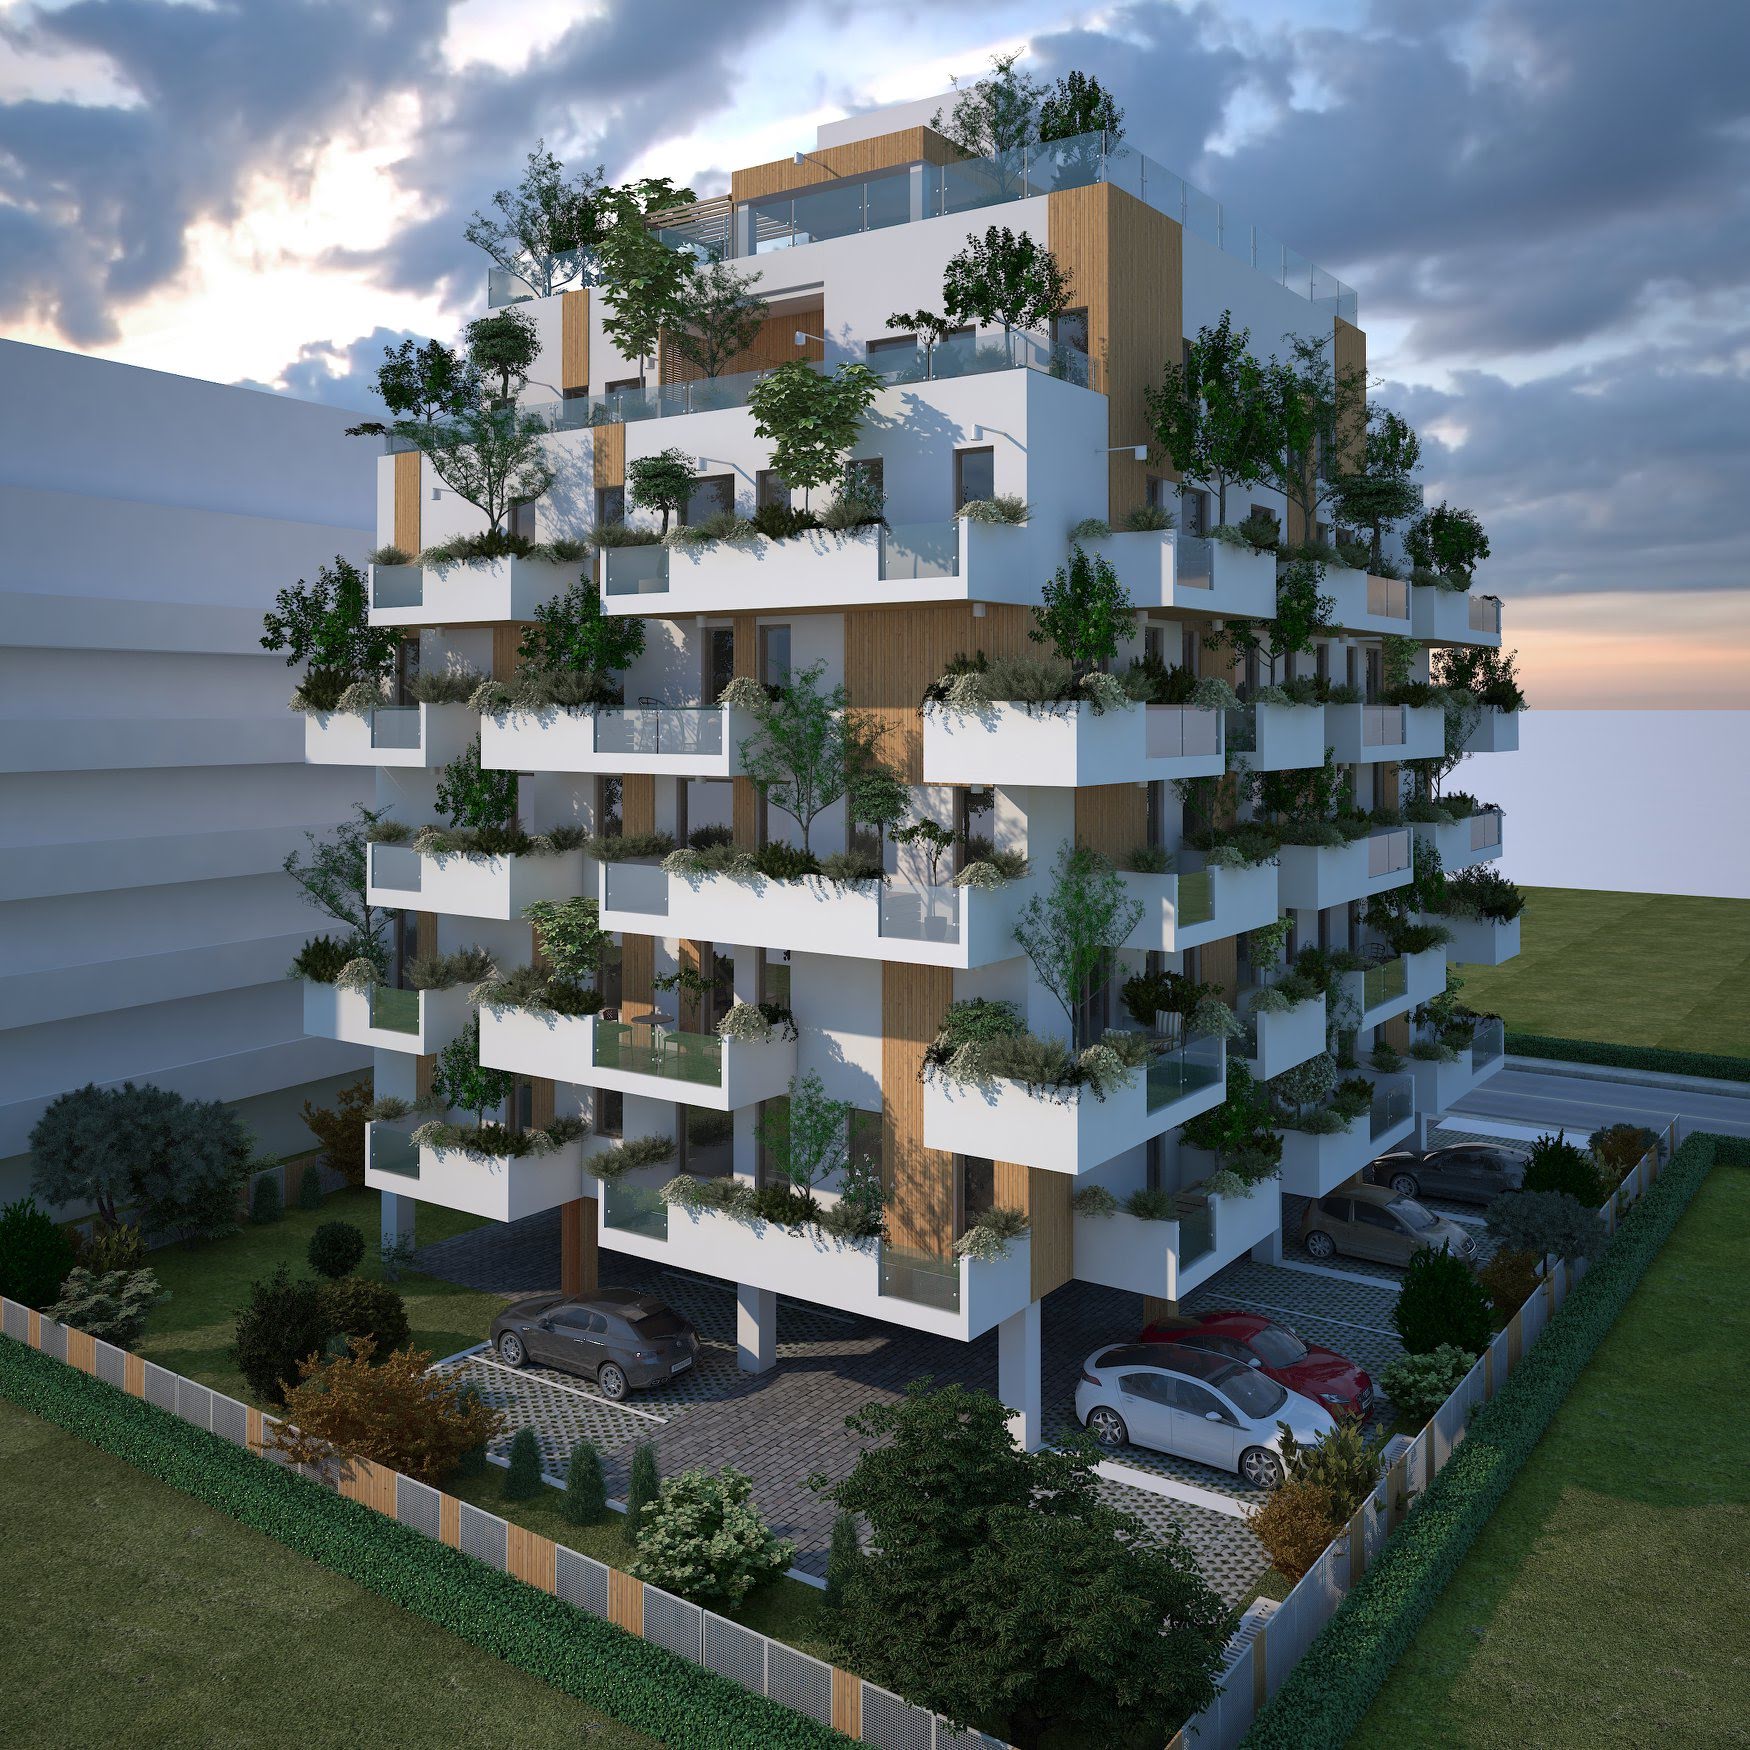 “Penetron inside”: The Waldturm Residences comprise 22 (2-3-bedroom) apartments with decorative wood façades and lush balconies, underground parking, elevator access and a rooftop pool.